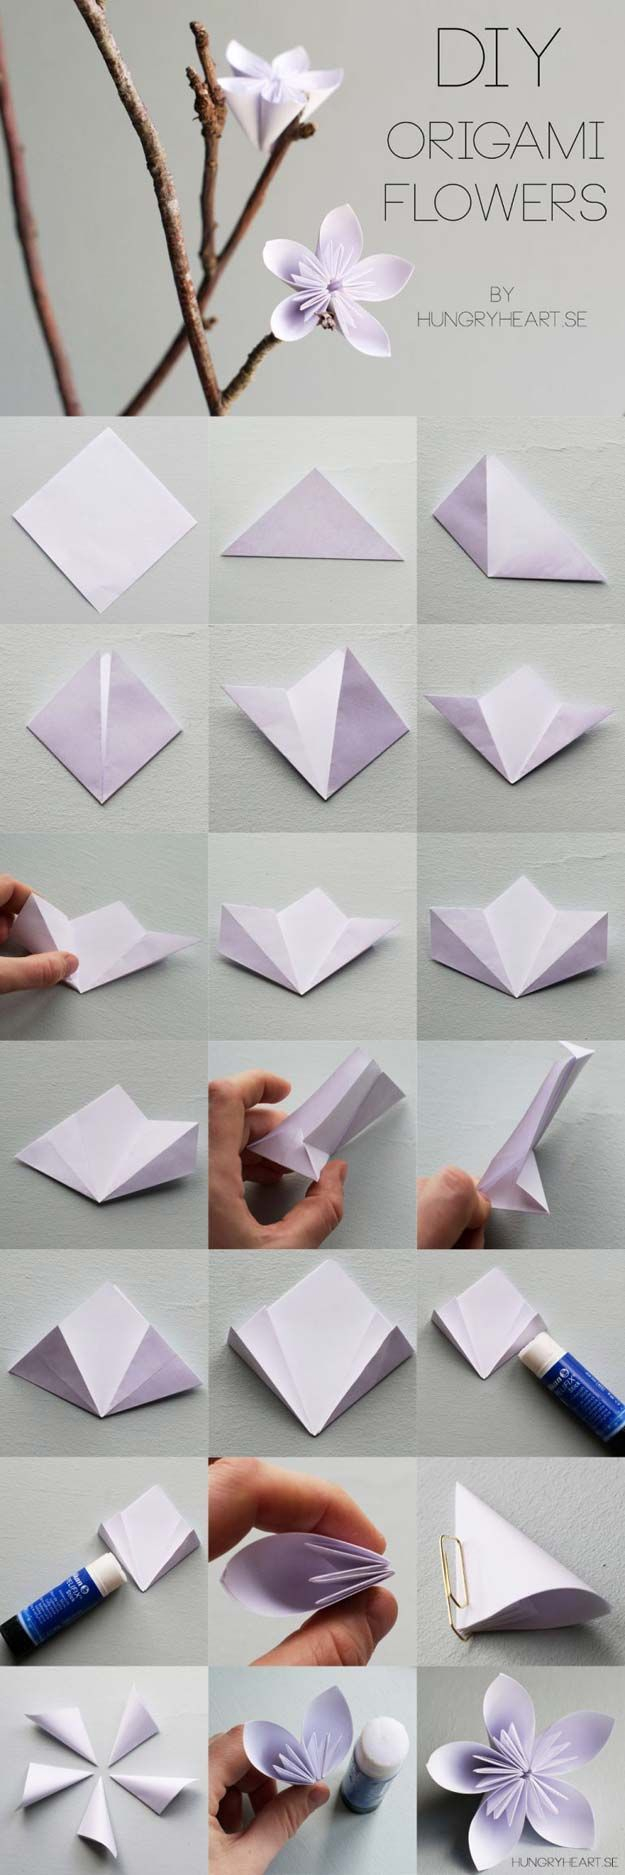 How To Make A Flower Origami Step By Step 15 Startling Tips How To Make Cool Origami Flowers